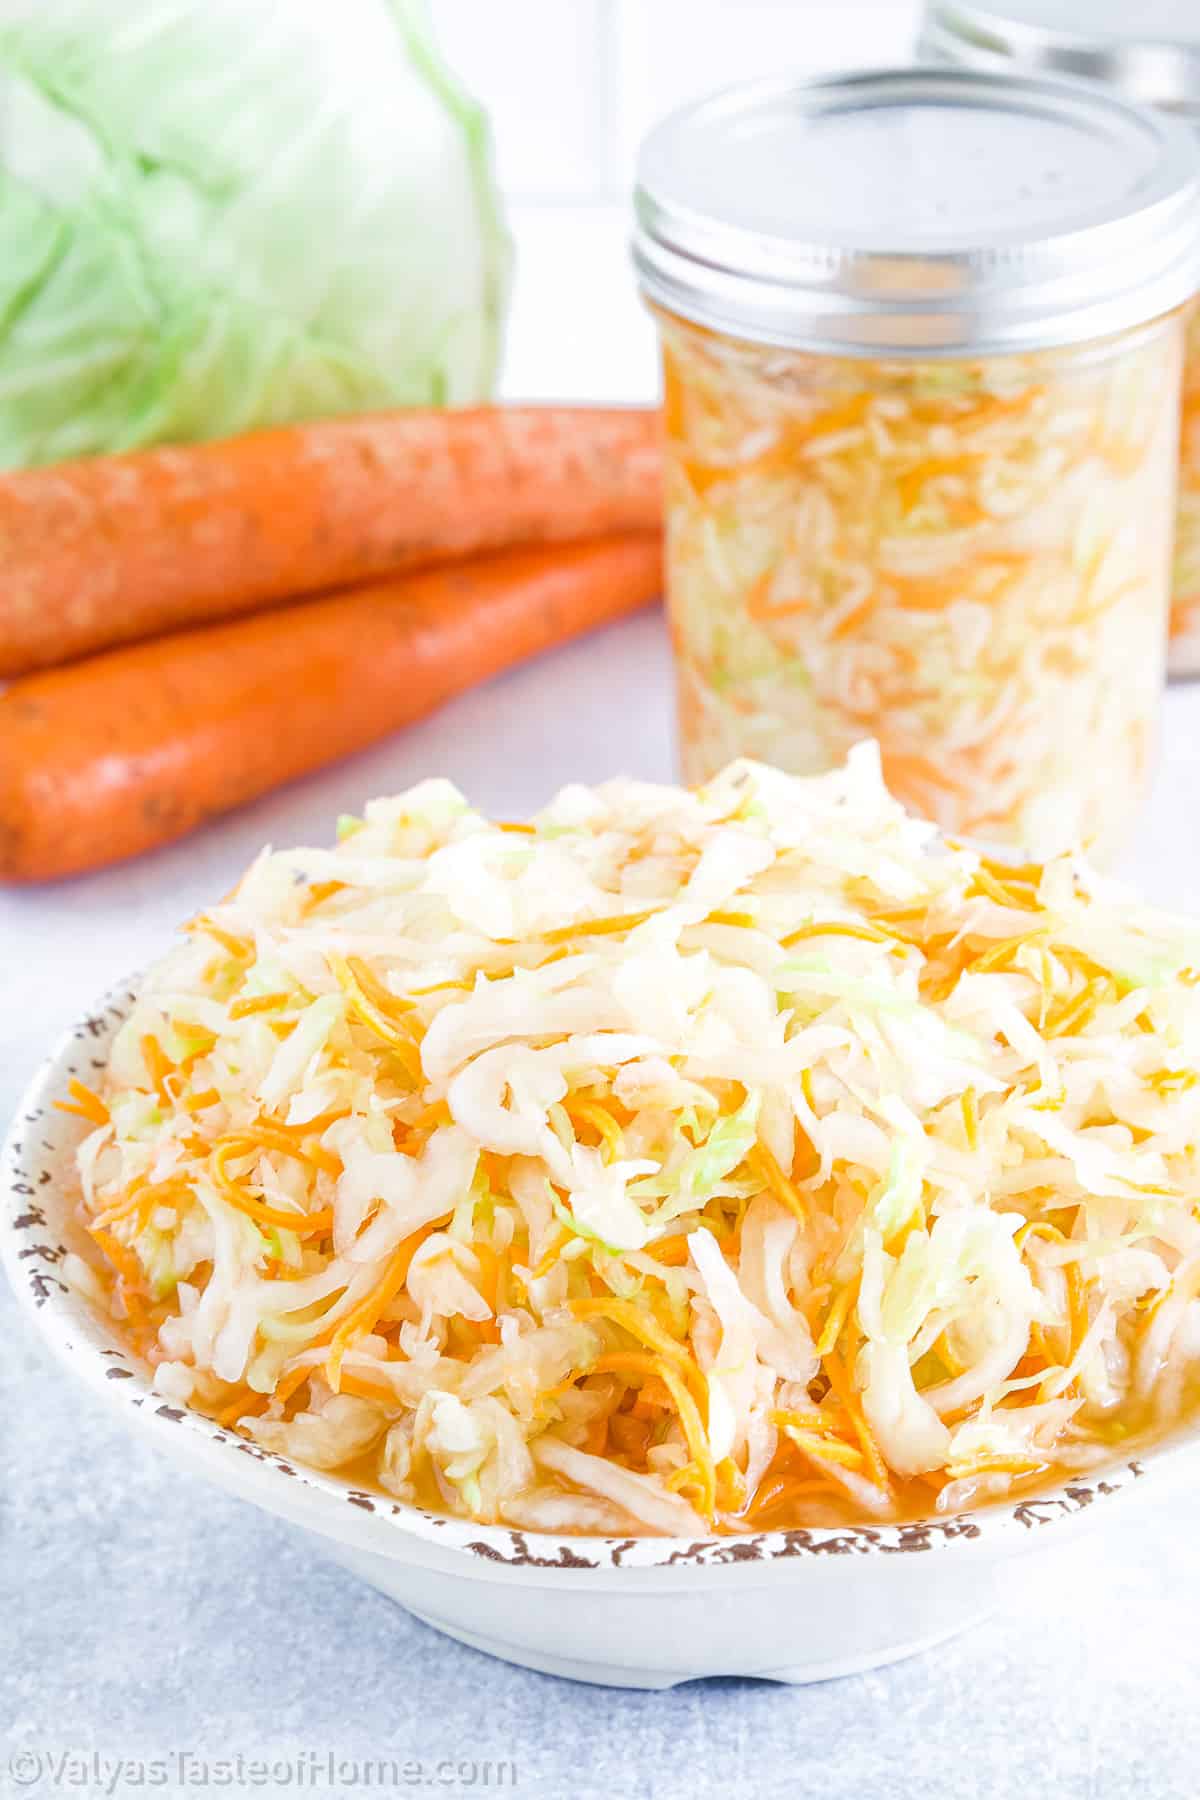 Made by shredding cabbage and carrots and adding just the right amount of salt, this dish is set to ferment, releasing its juices and creating a flavorful brine. 